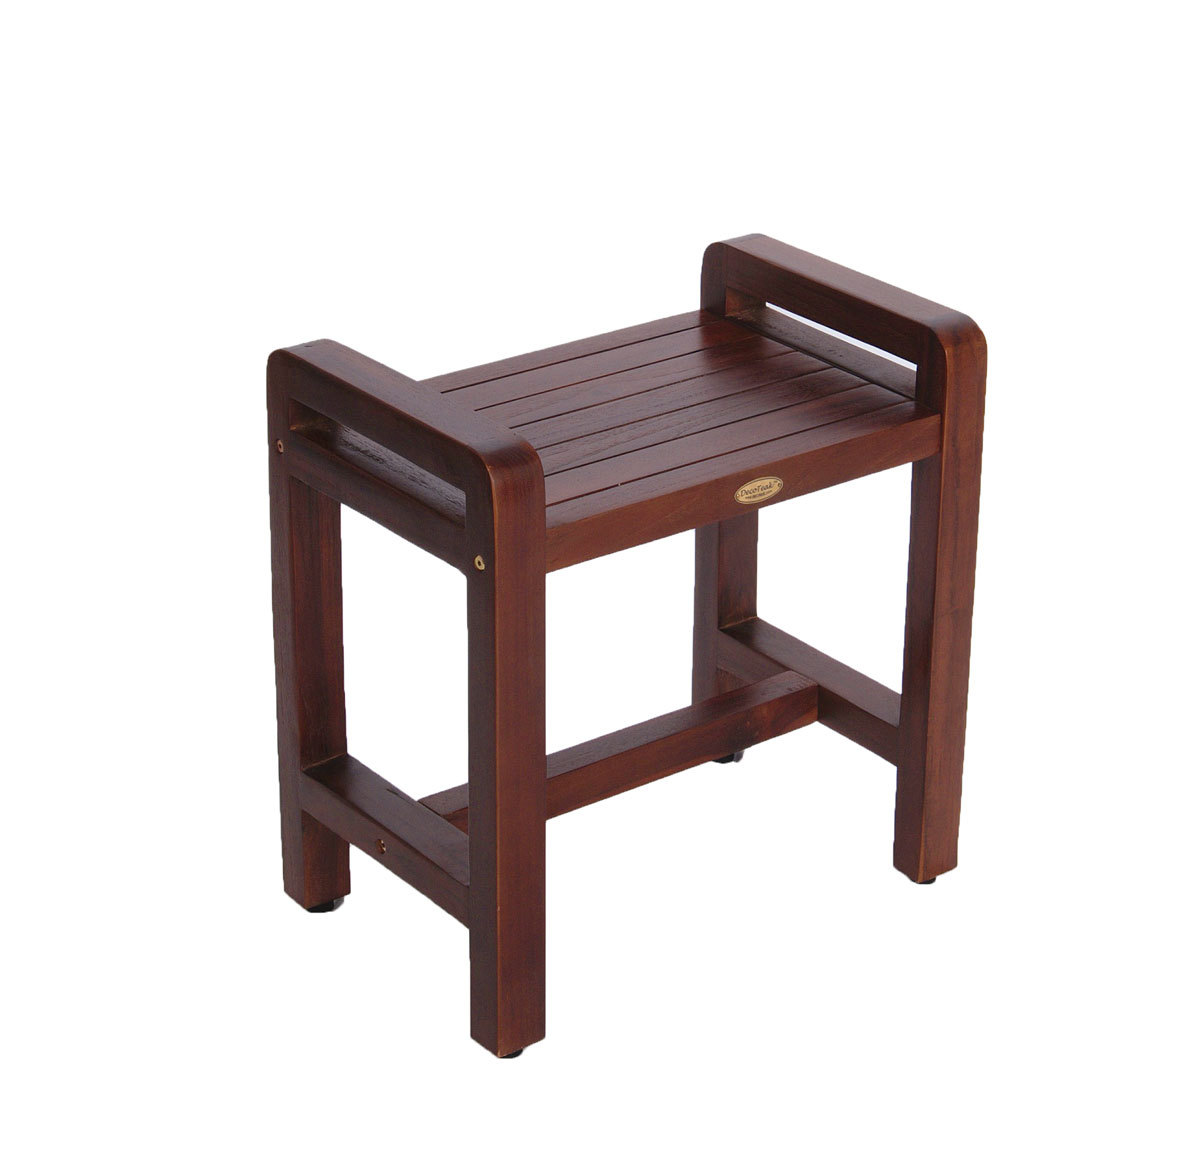 DT106 Classic Ergonomic Teak Spa Stool with Shelf and Lift Aide Arms